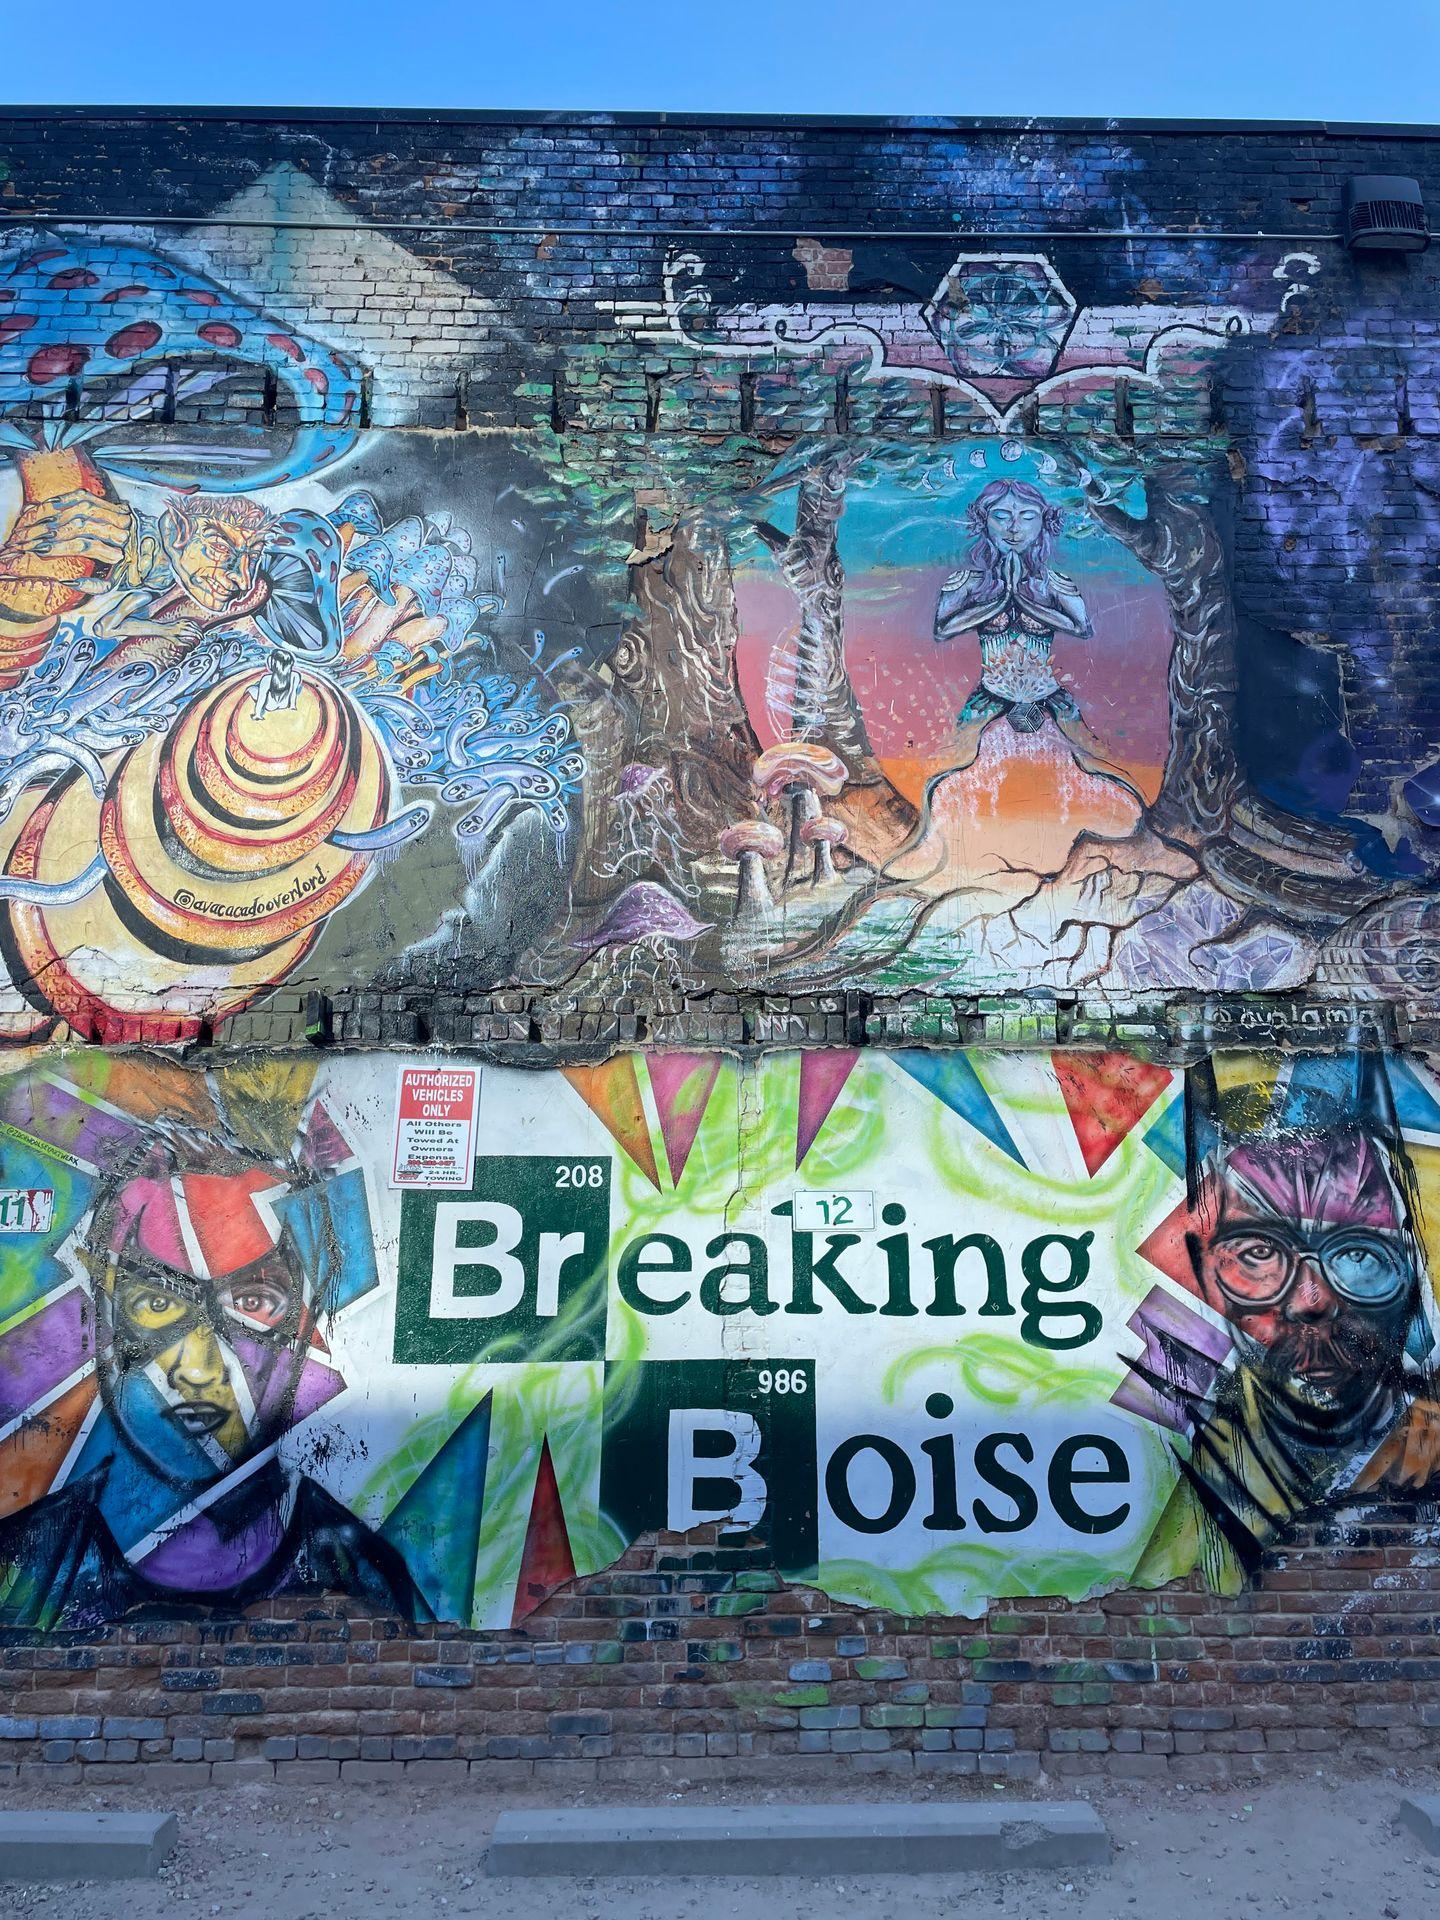 A wall covered in murals, including a piece of art that reads "Breaking Boise" and resembles the "Breaking Bad" logo